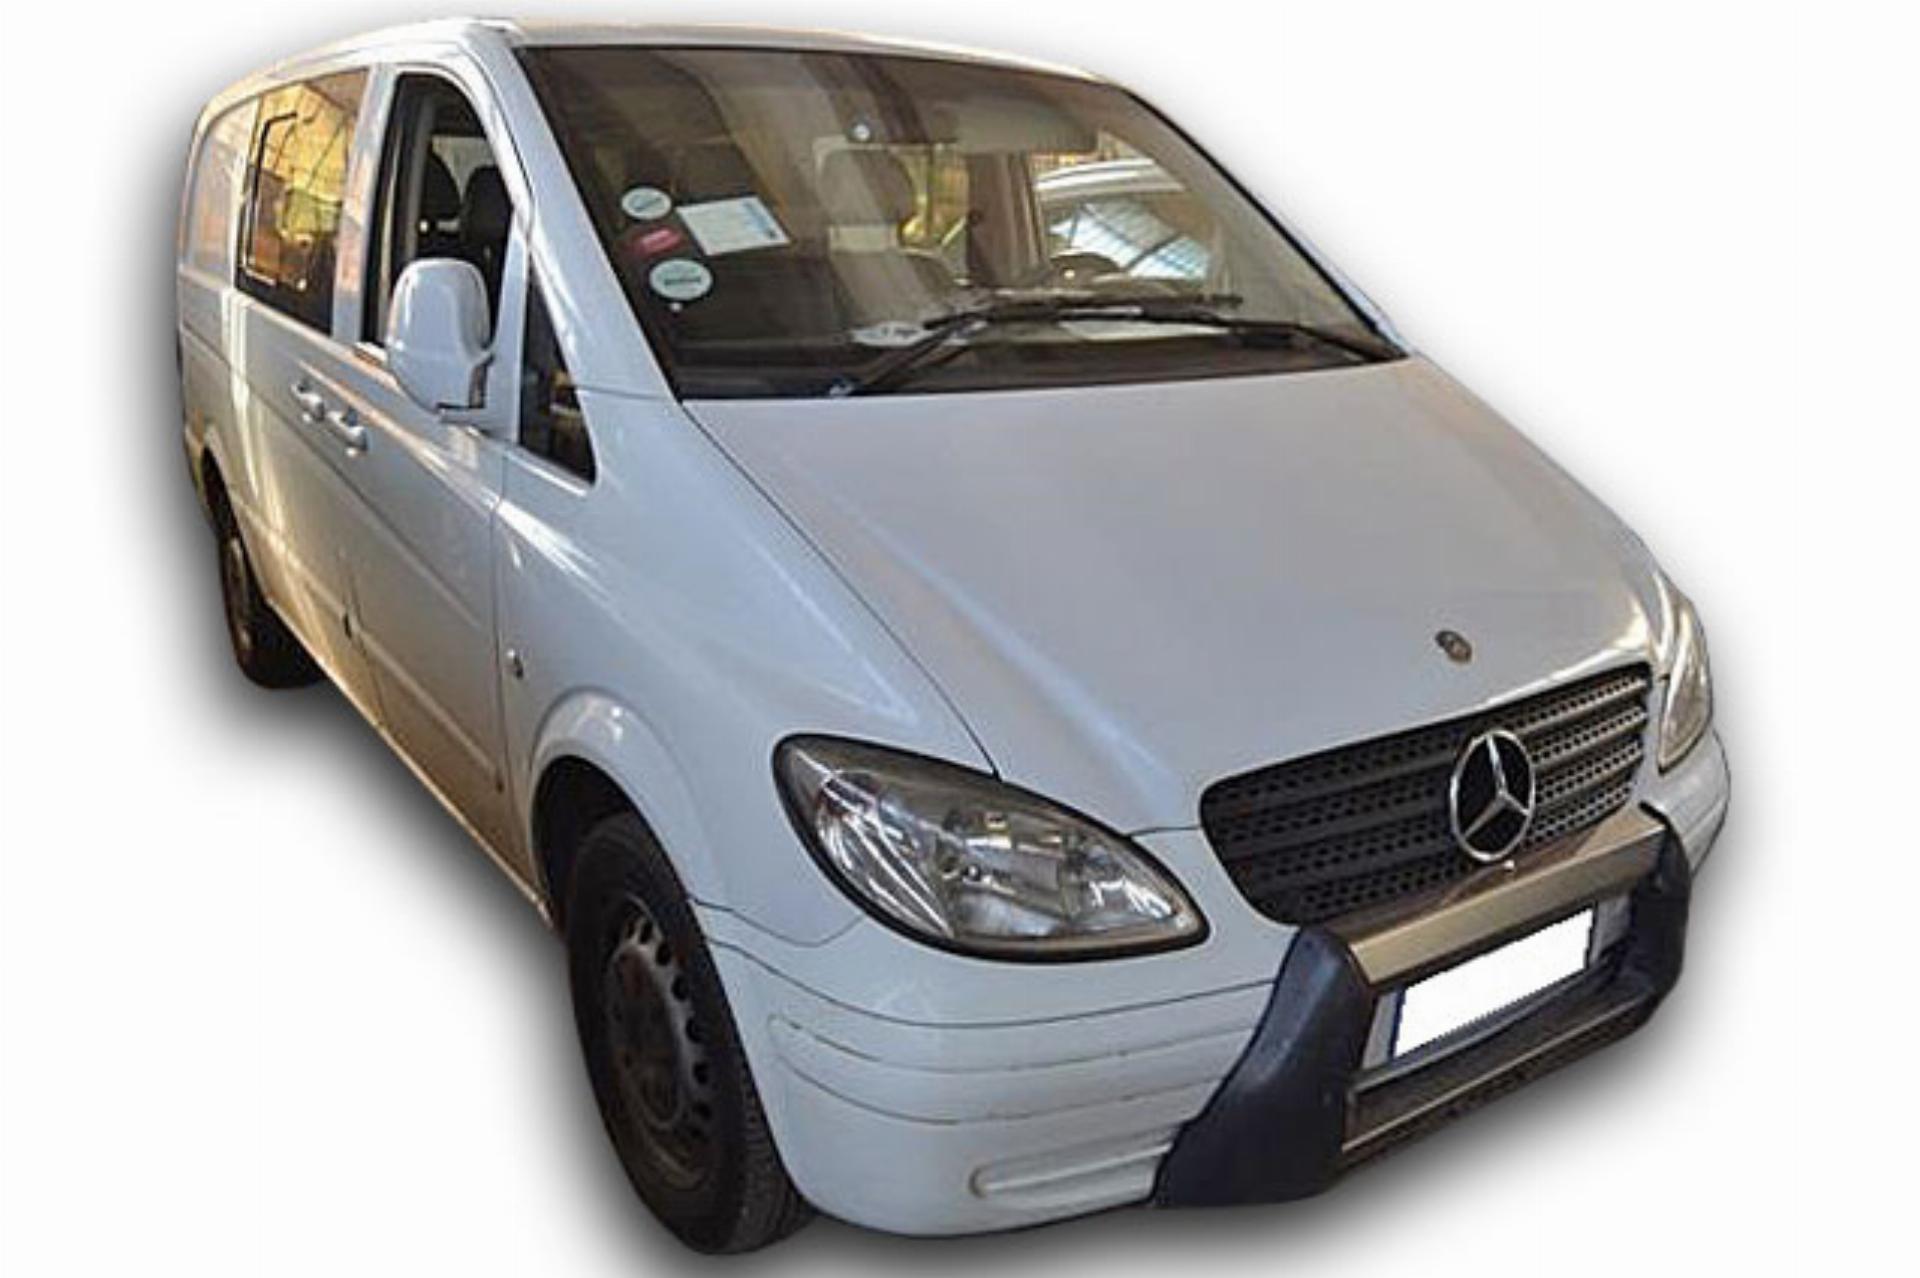 Repossessed Mercedes Benz Vito 115 2.2 Cdi 2006 on auction